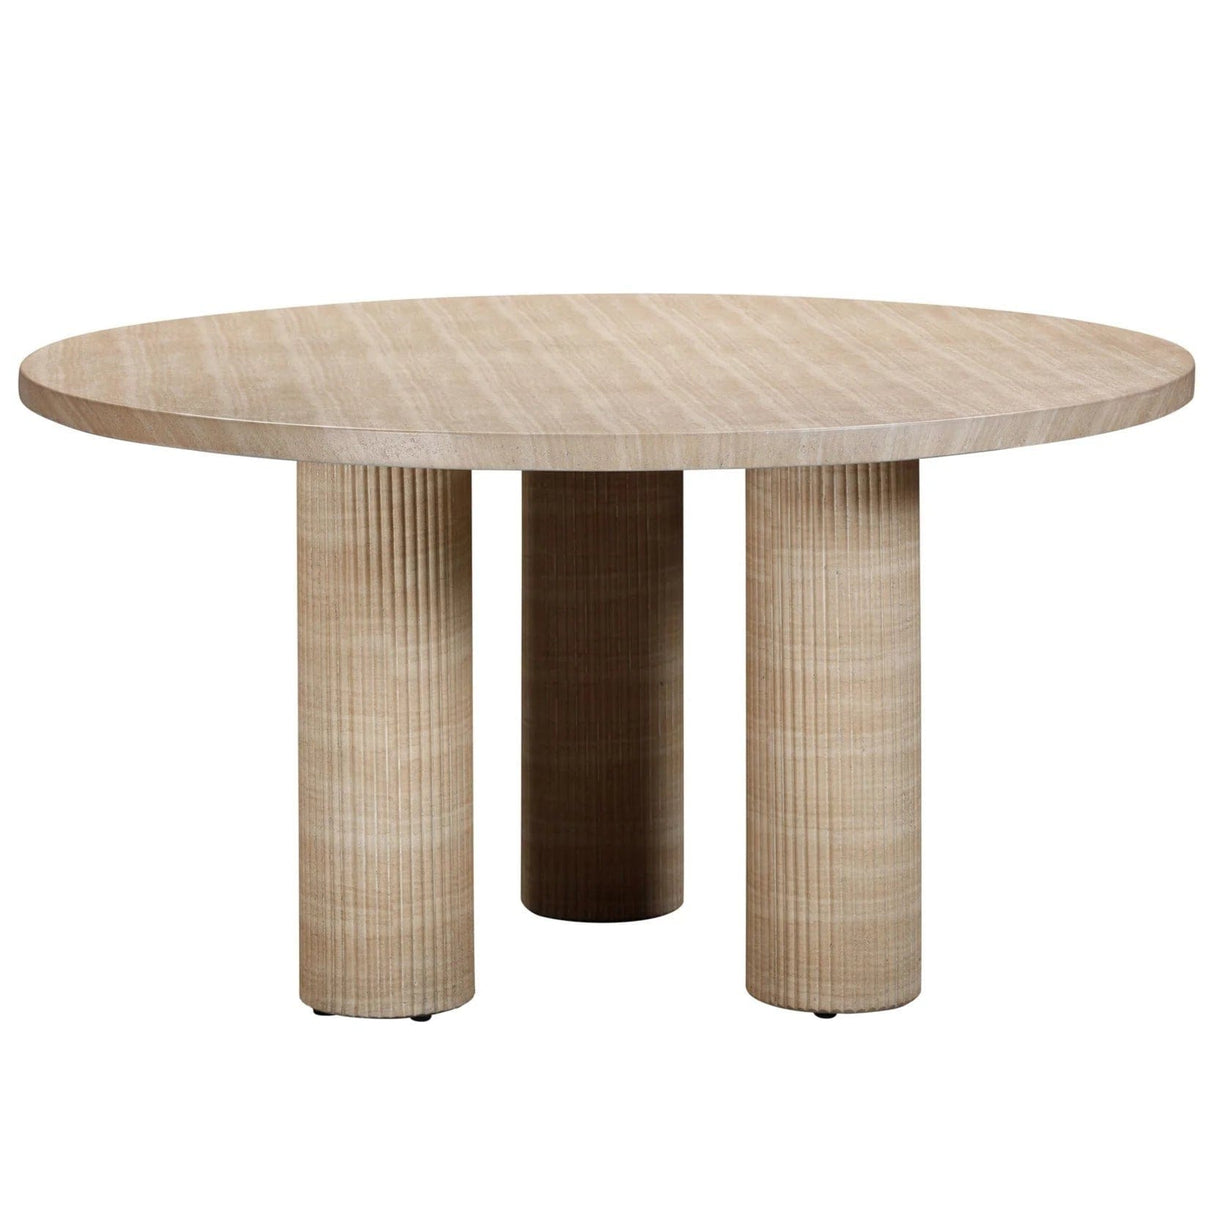 Candelabra Home Patti Textured Faux Travertine Indoor/Outdoor Dining Table Dining Tables TOV-O54276